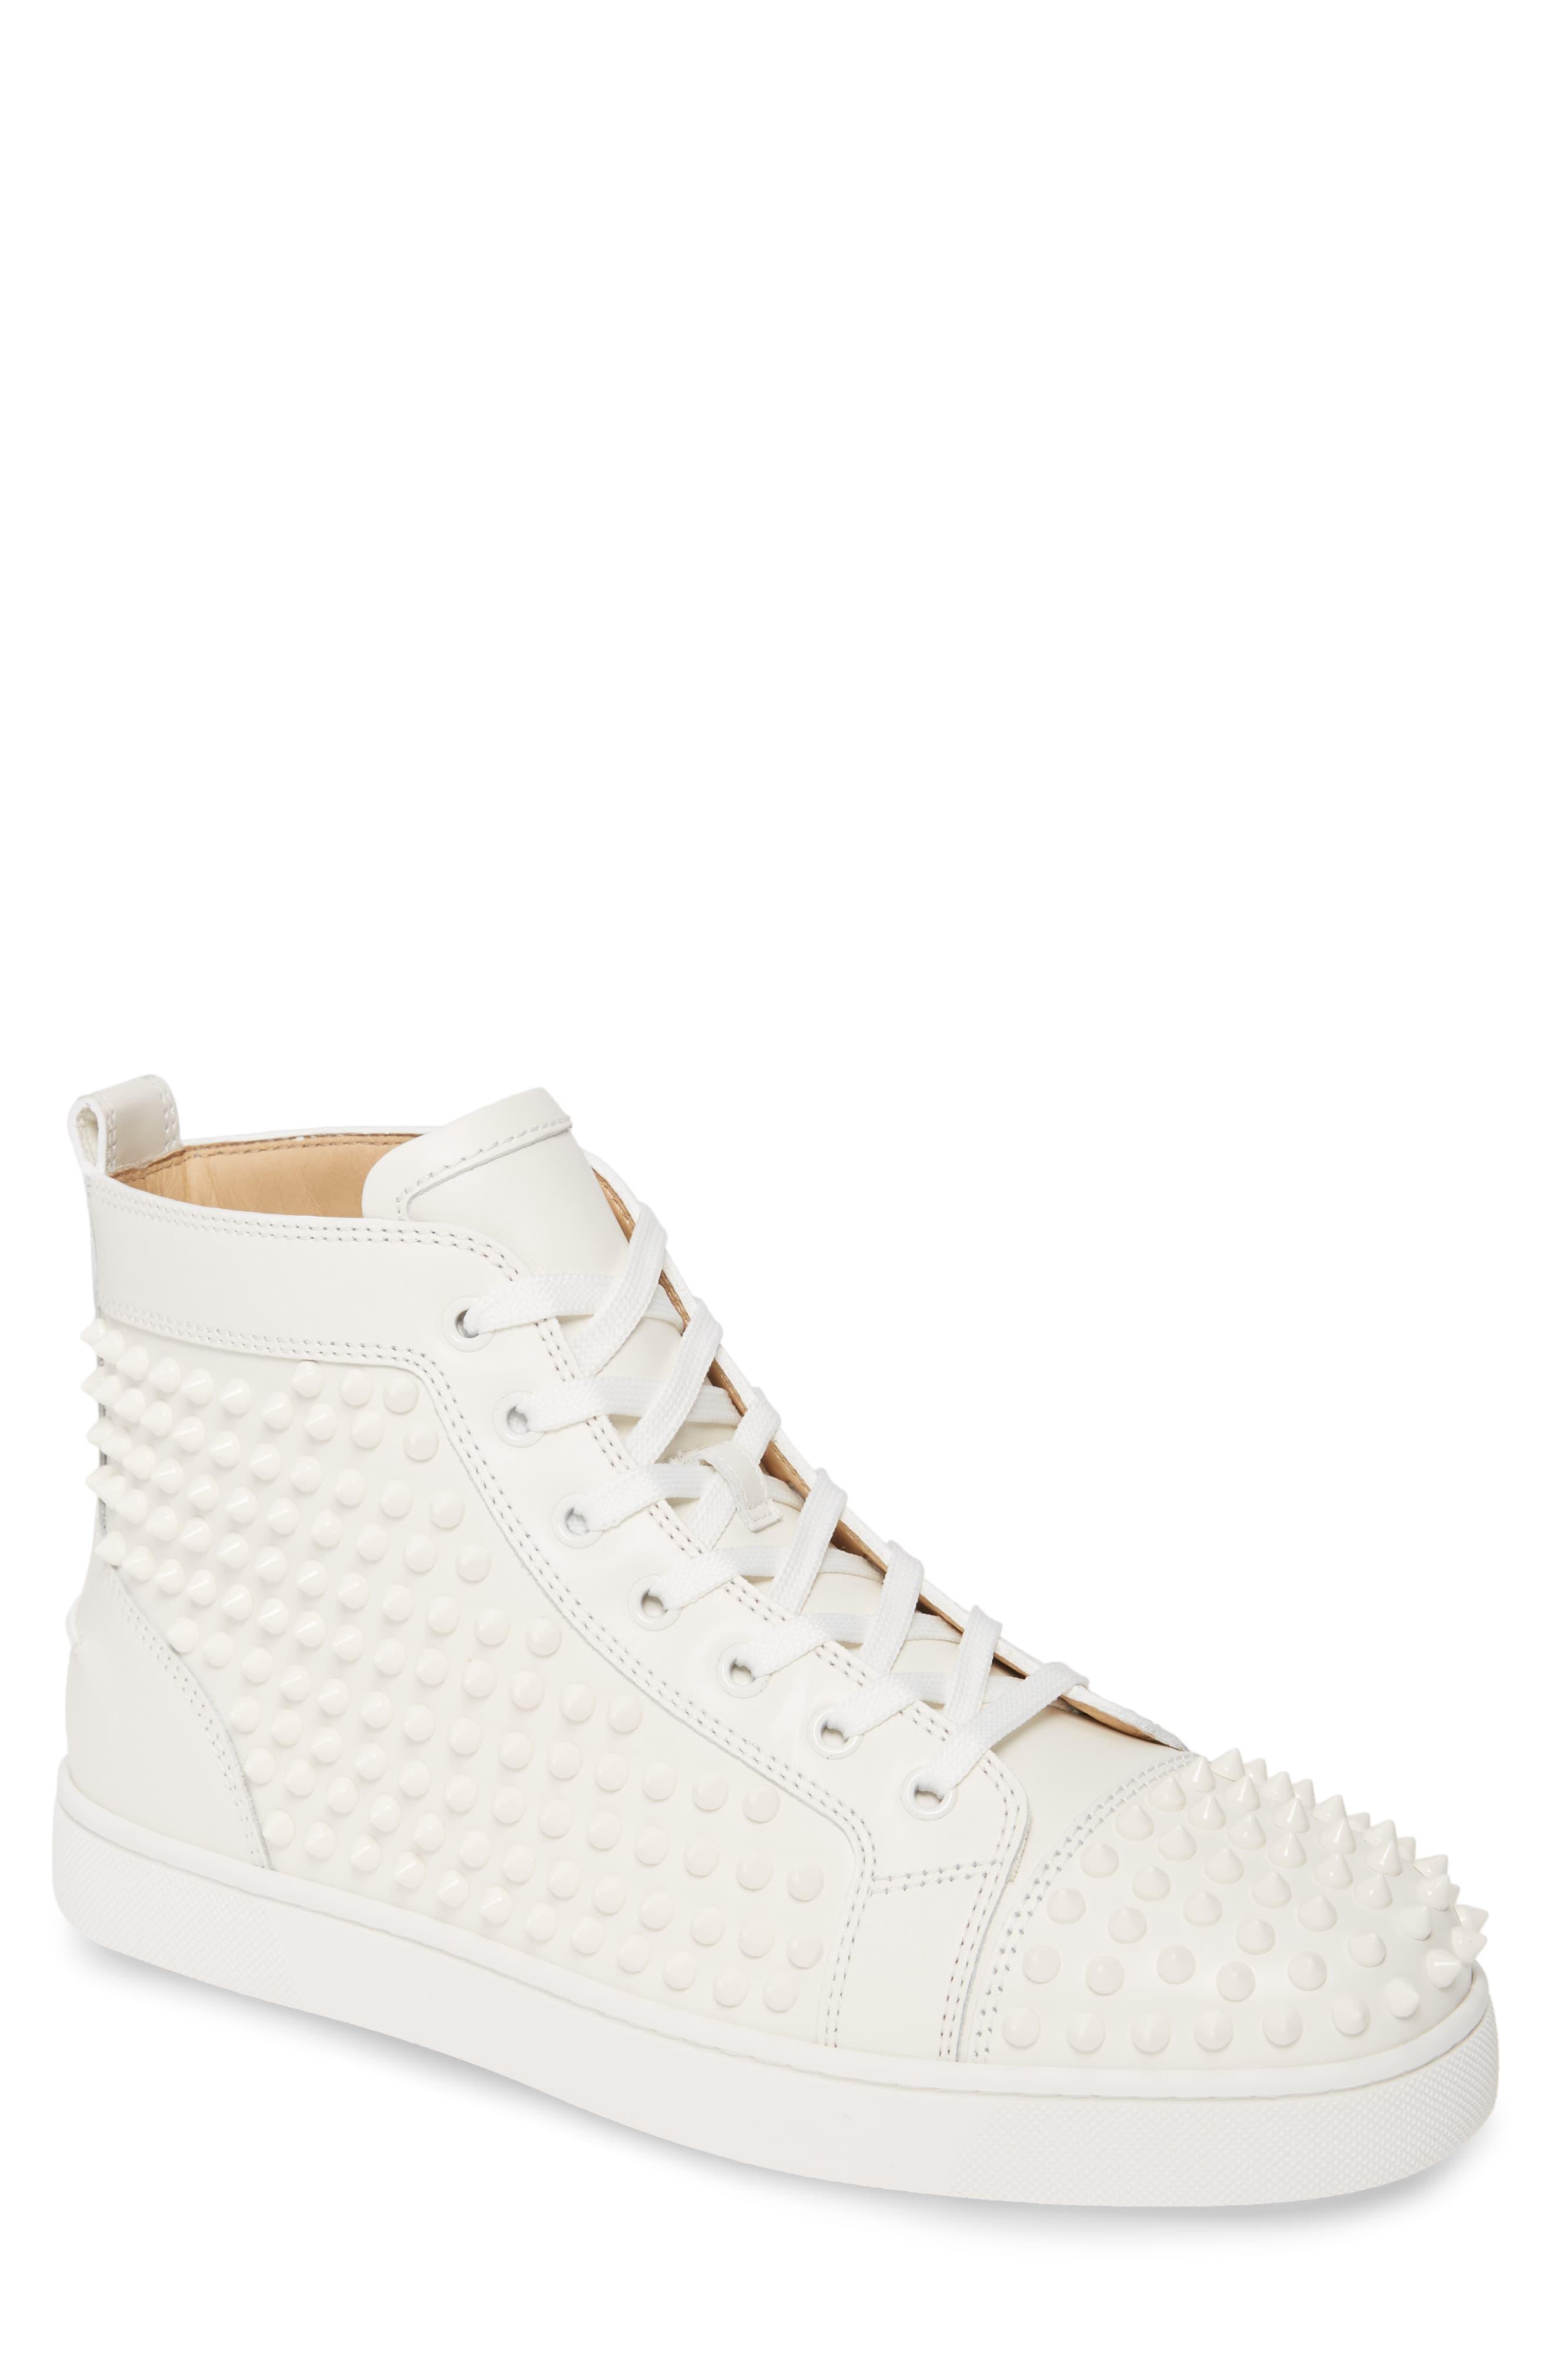 Red bottom Louis Vuitton spike sneakers for Sale in Kent, WA